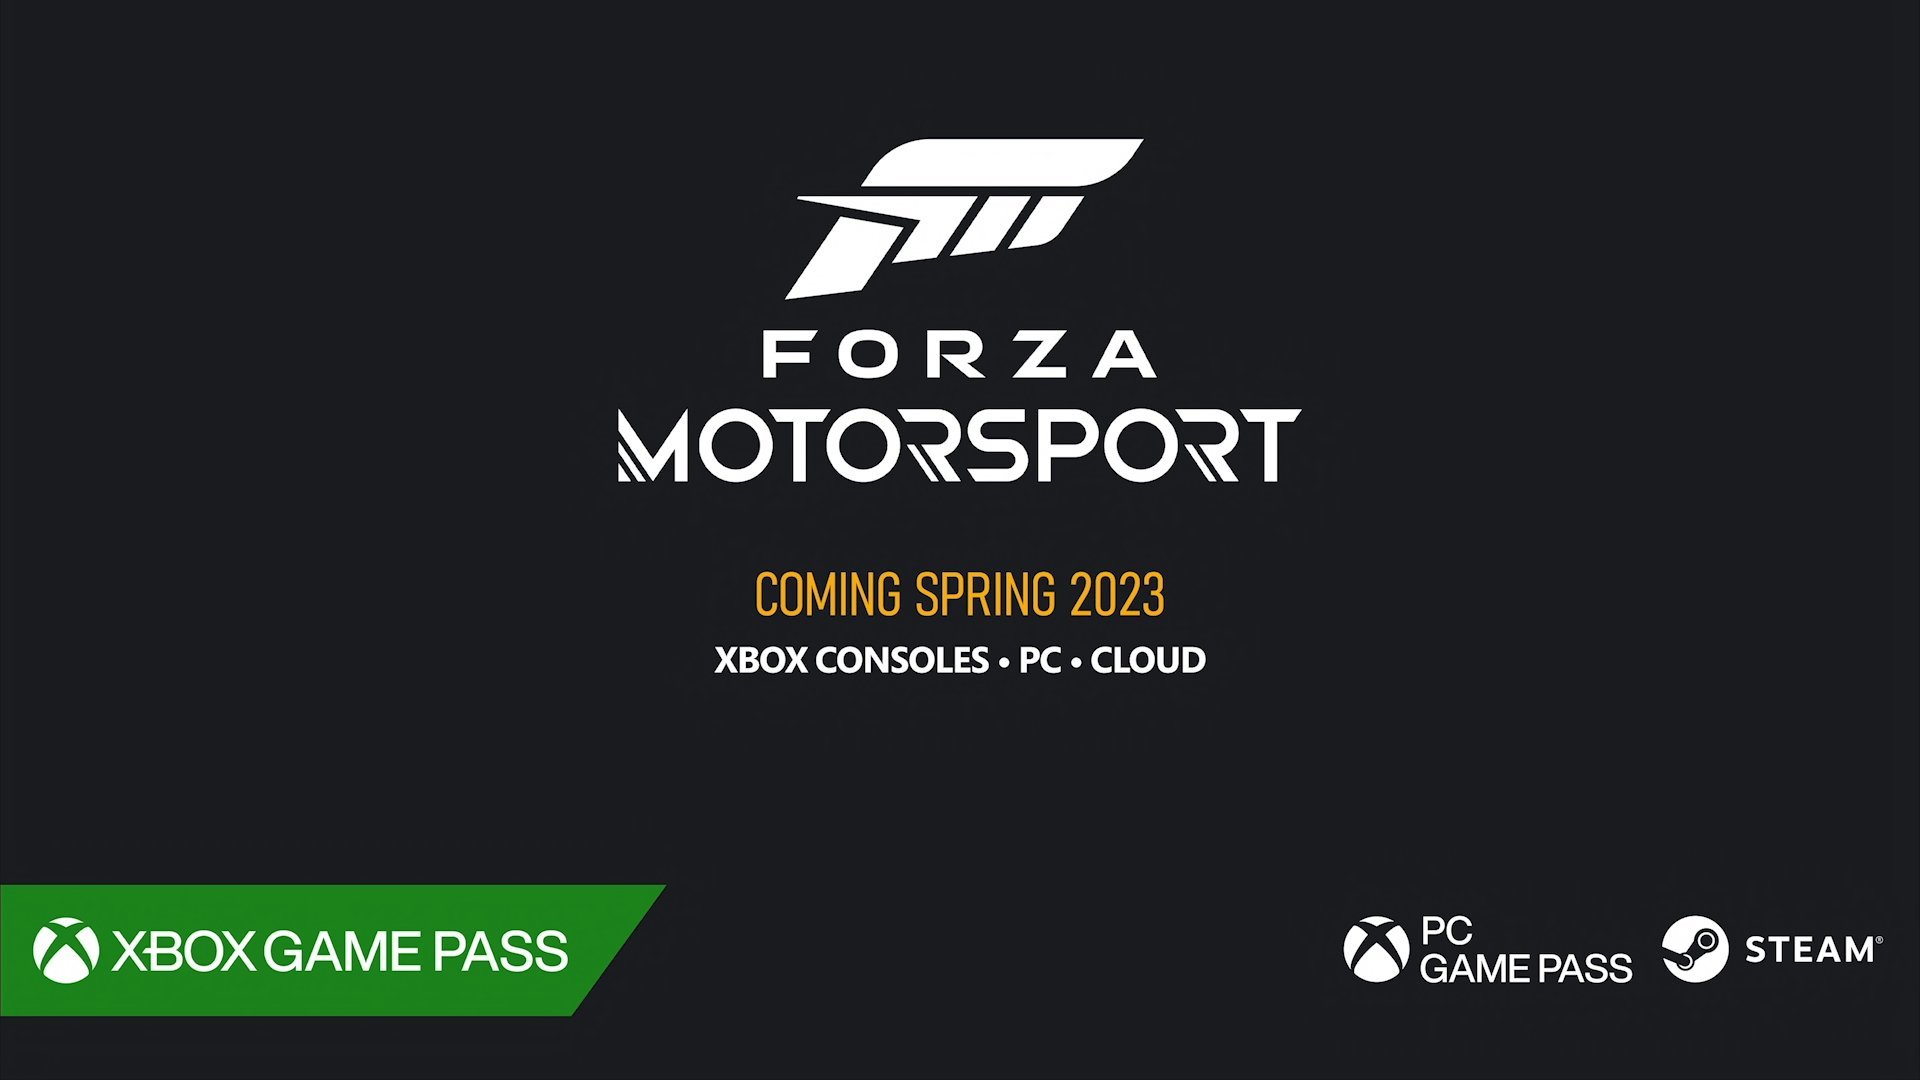 Forza Motorsport launches Spring 2023 on Xbox and Xbox Game Pass